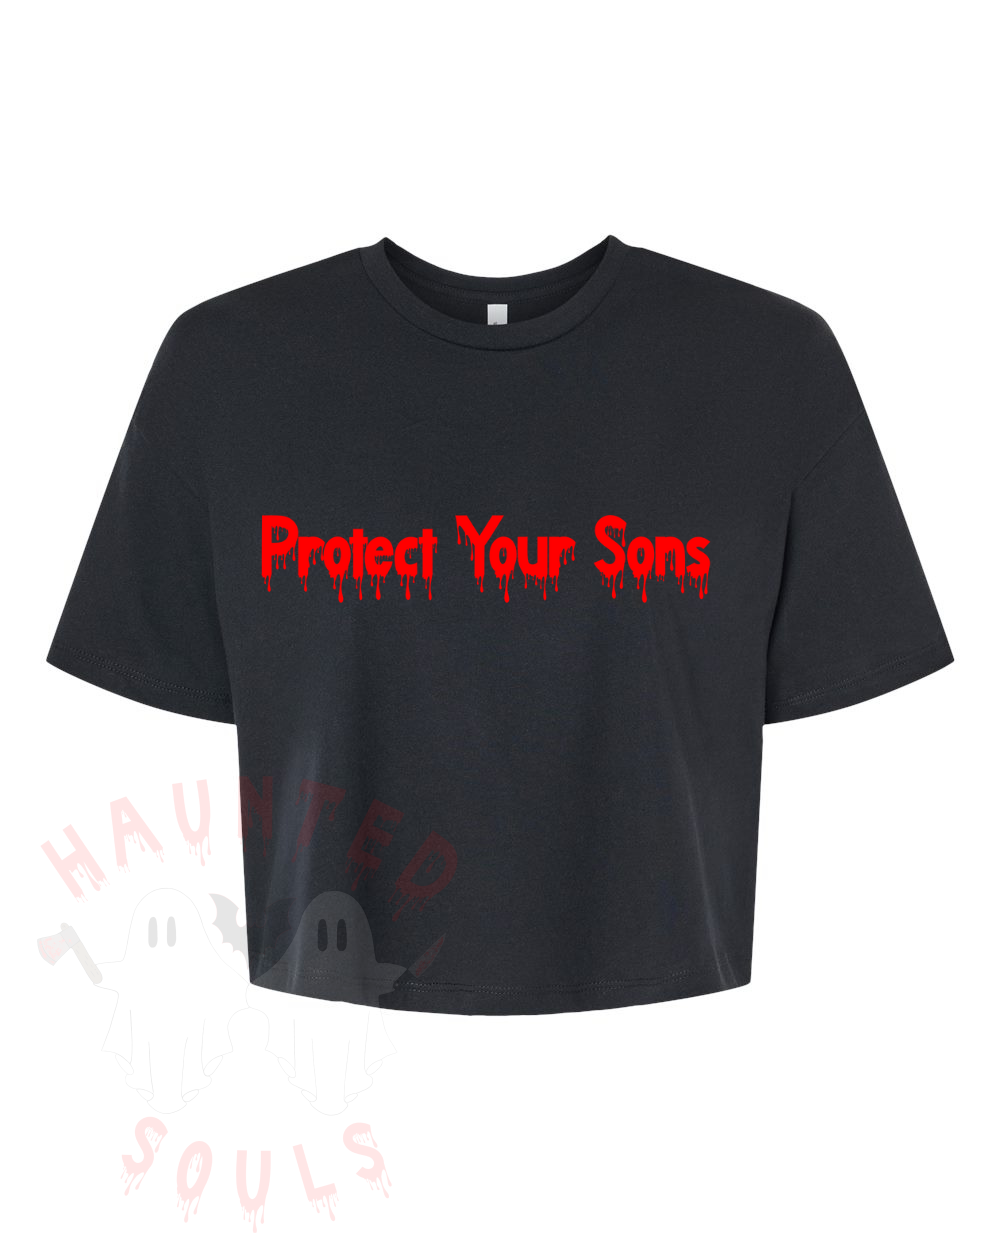 Protect Your Sons Adult Cropped T-Shirt